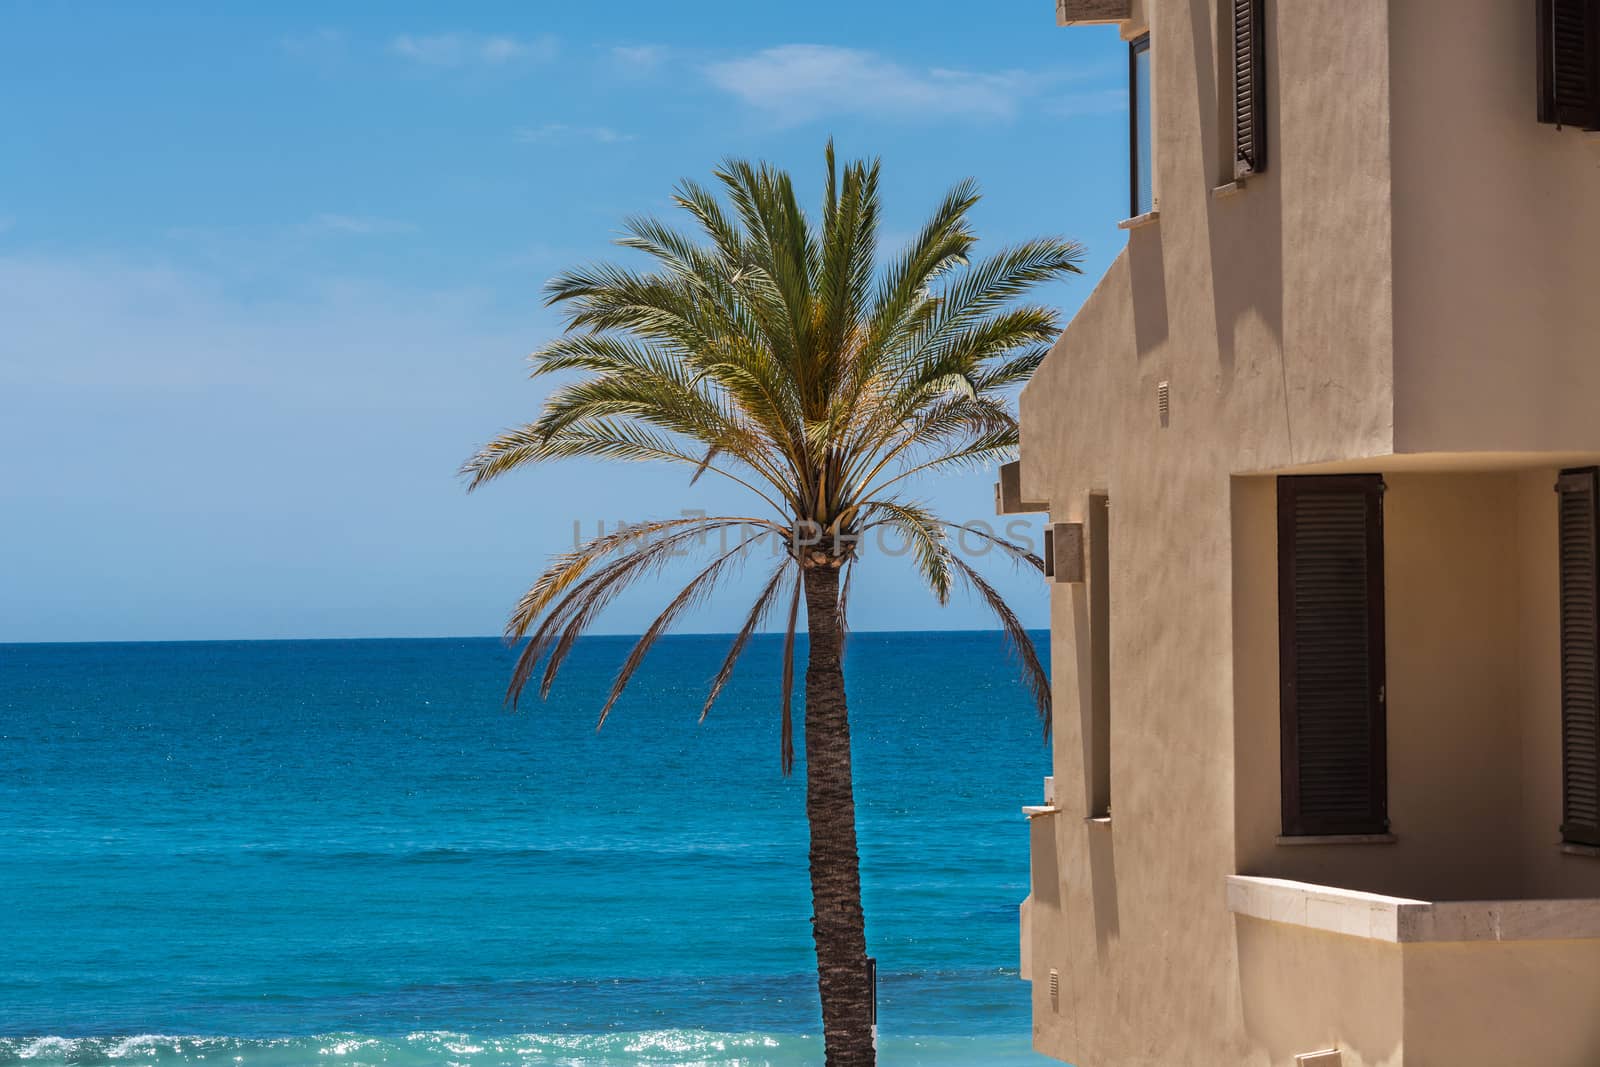 Overlooking the blue sea in the foreground a Spanish style house and a palm tree.